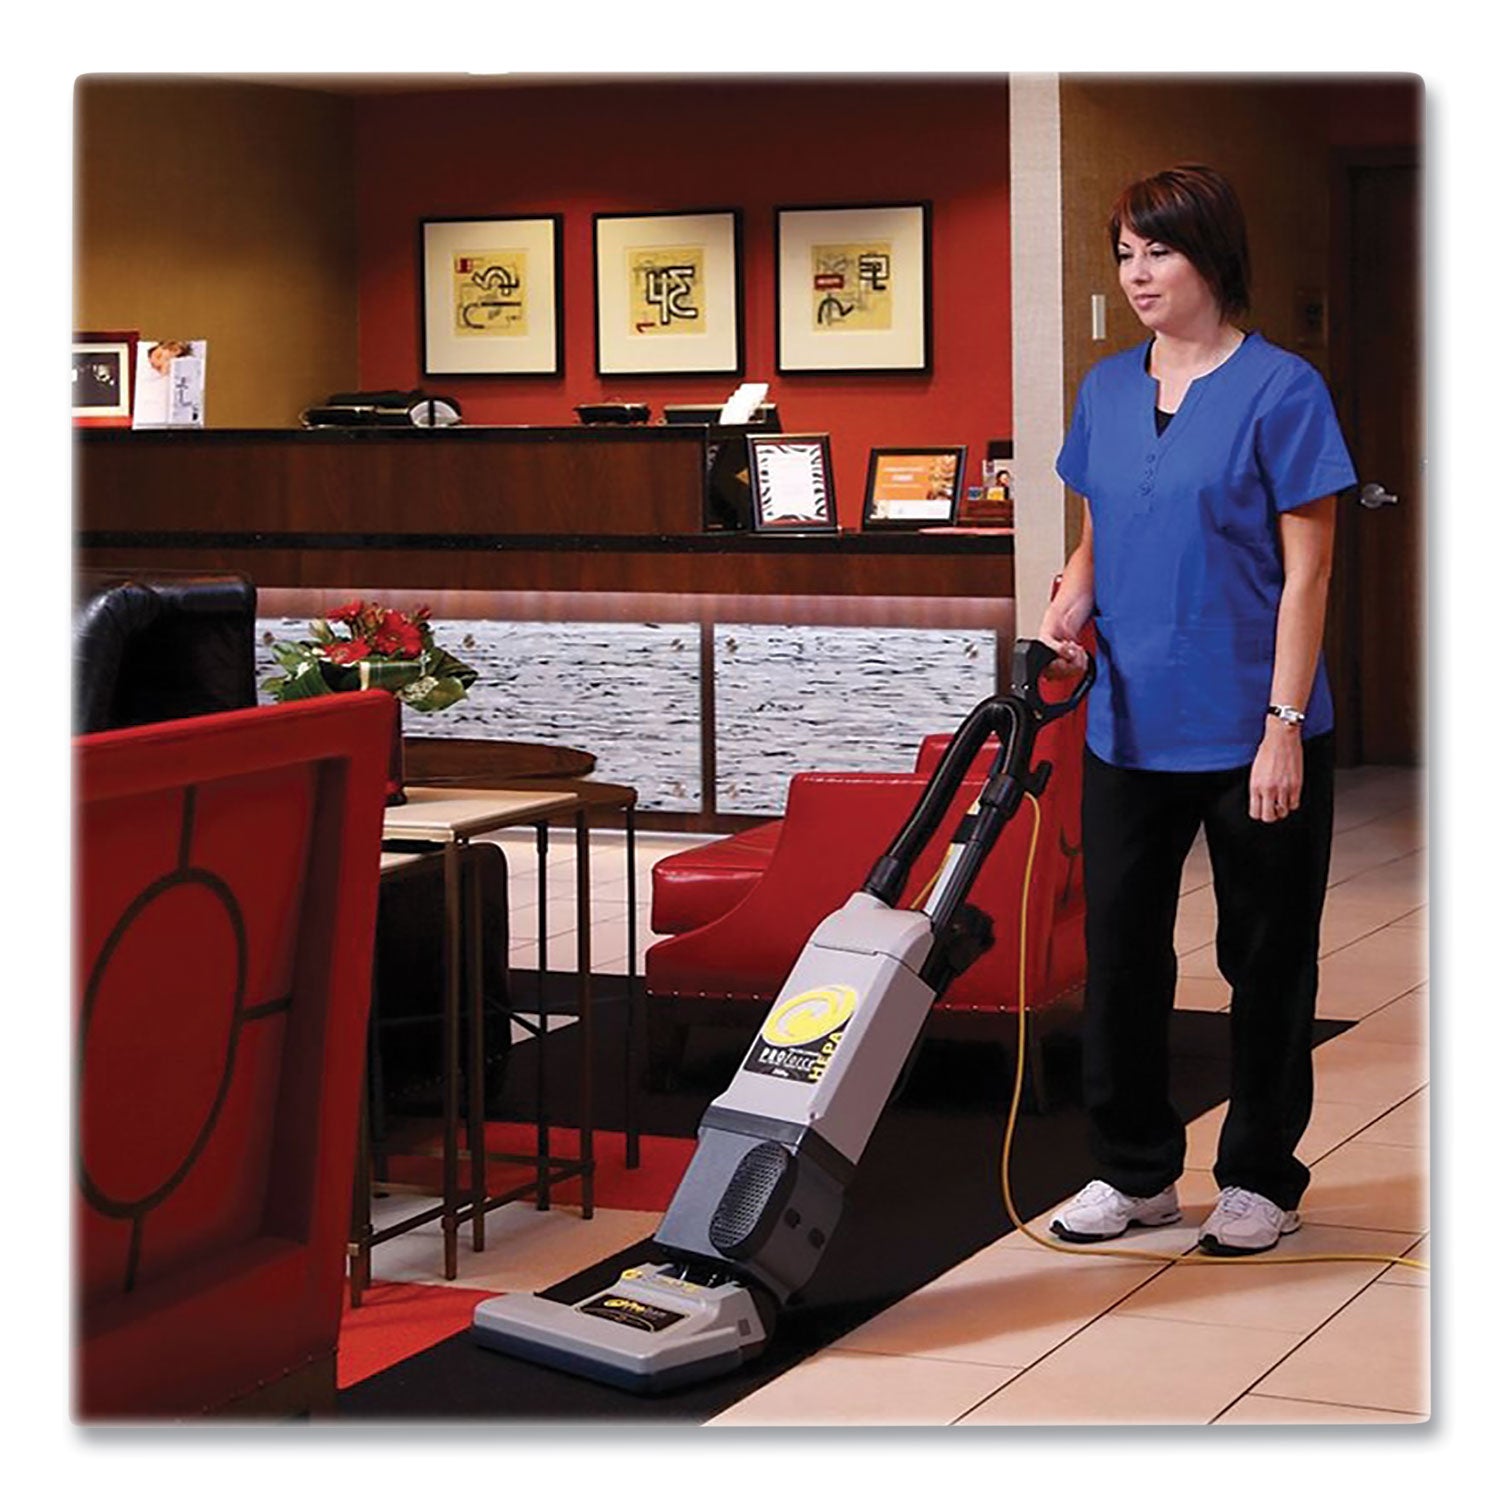 proforce-1500xp-upright-vacuum-15-cleaning-path-gray-black_ptm107252 - 3